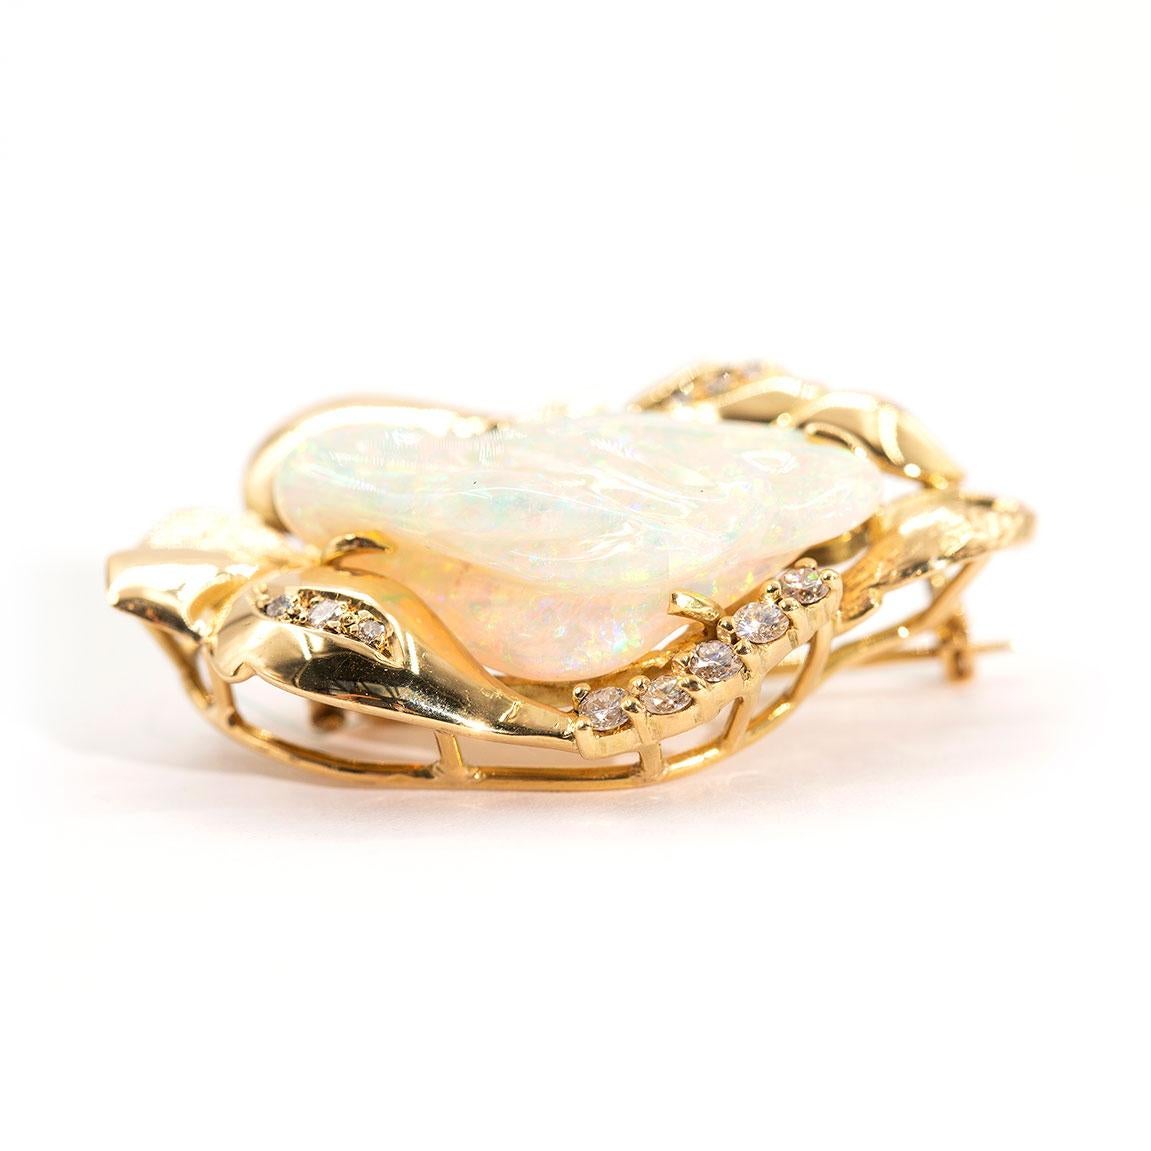 9.6 Carat Solid Australian Carved Opal and Diamond 18 Carat Gold Pendant Brooch For Sale 2